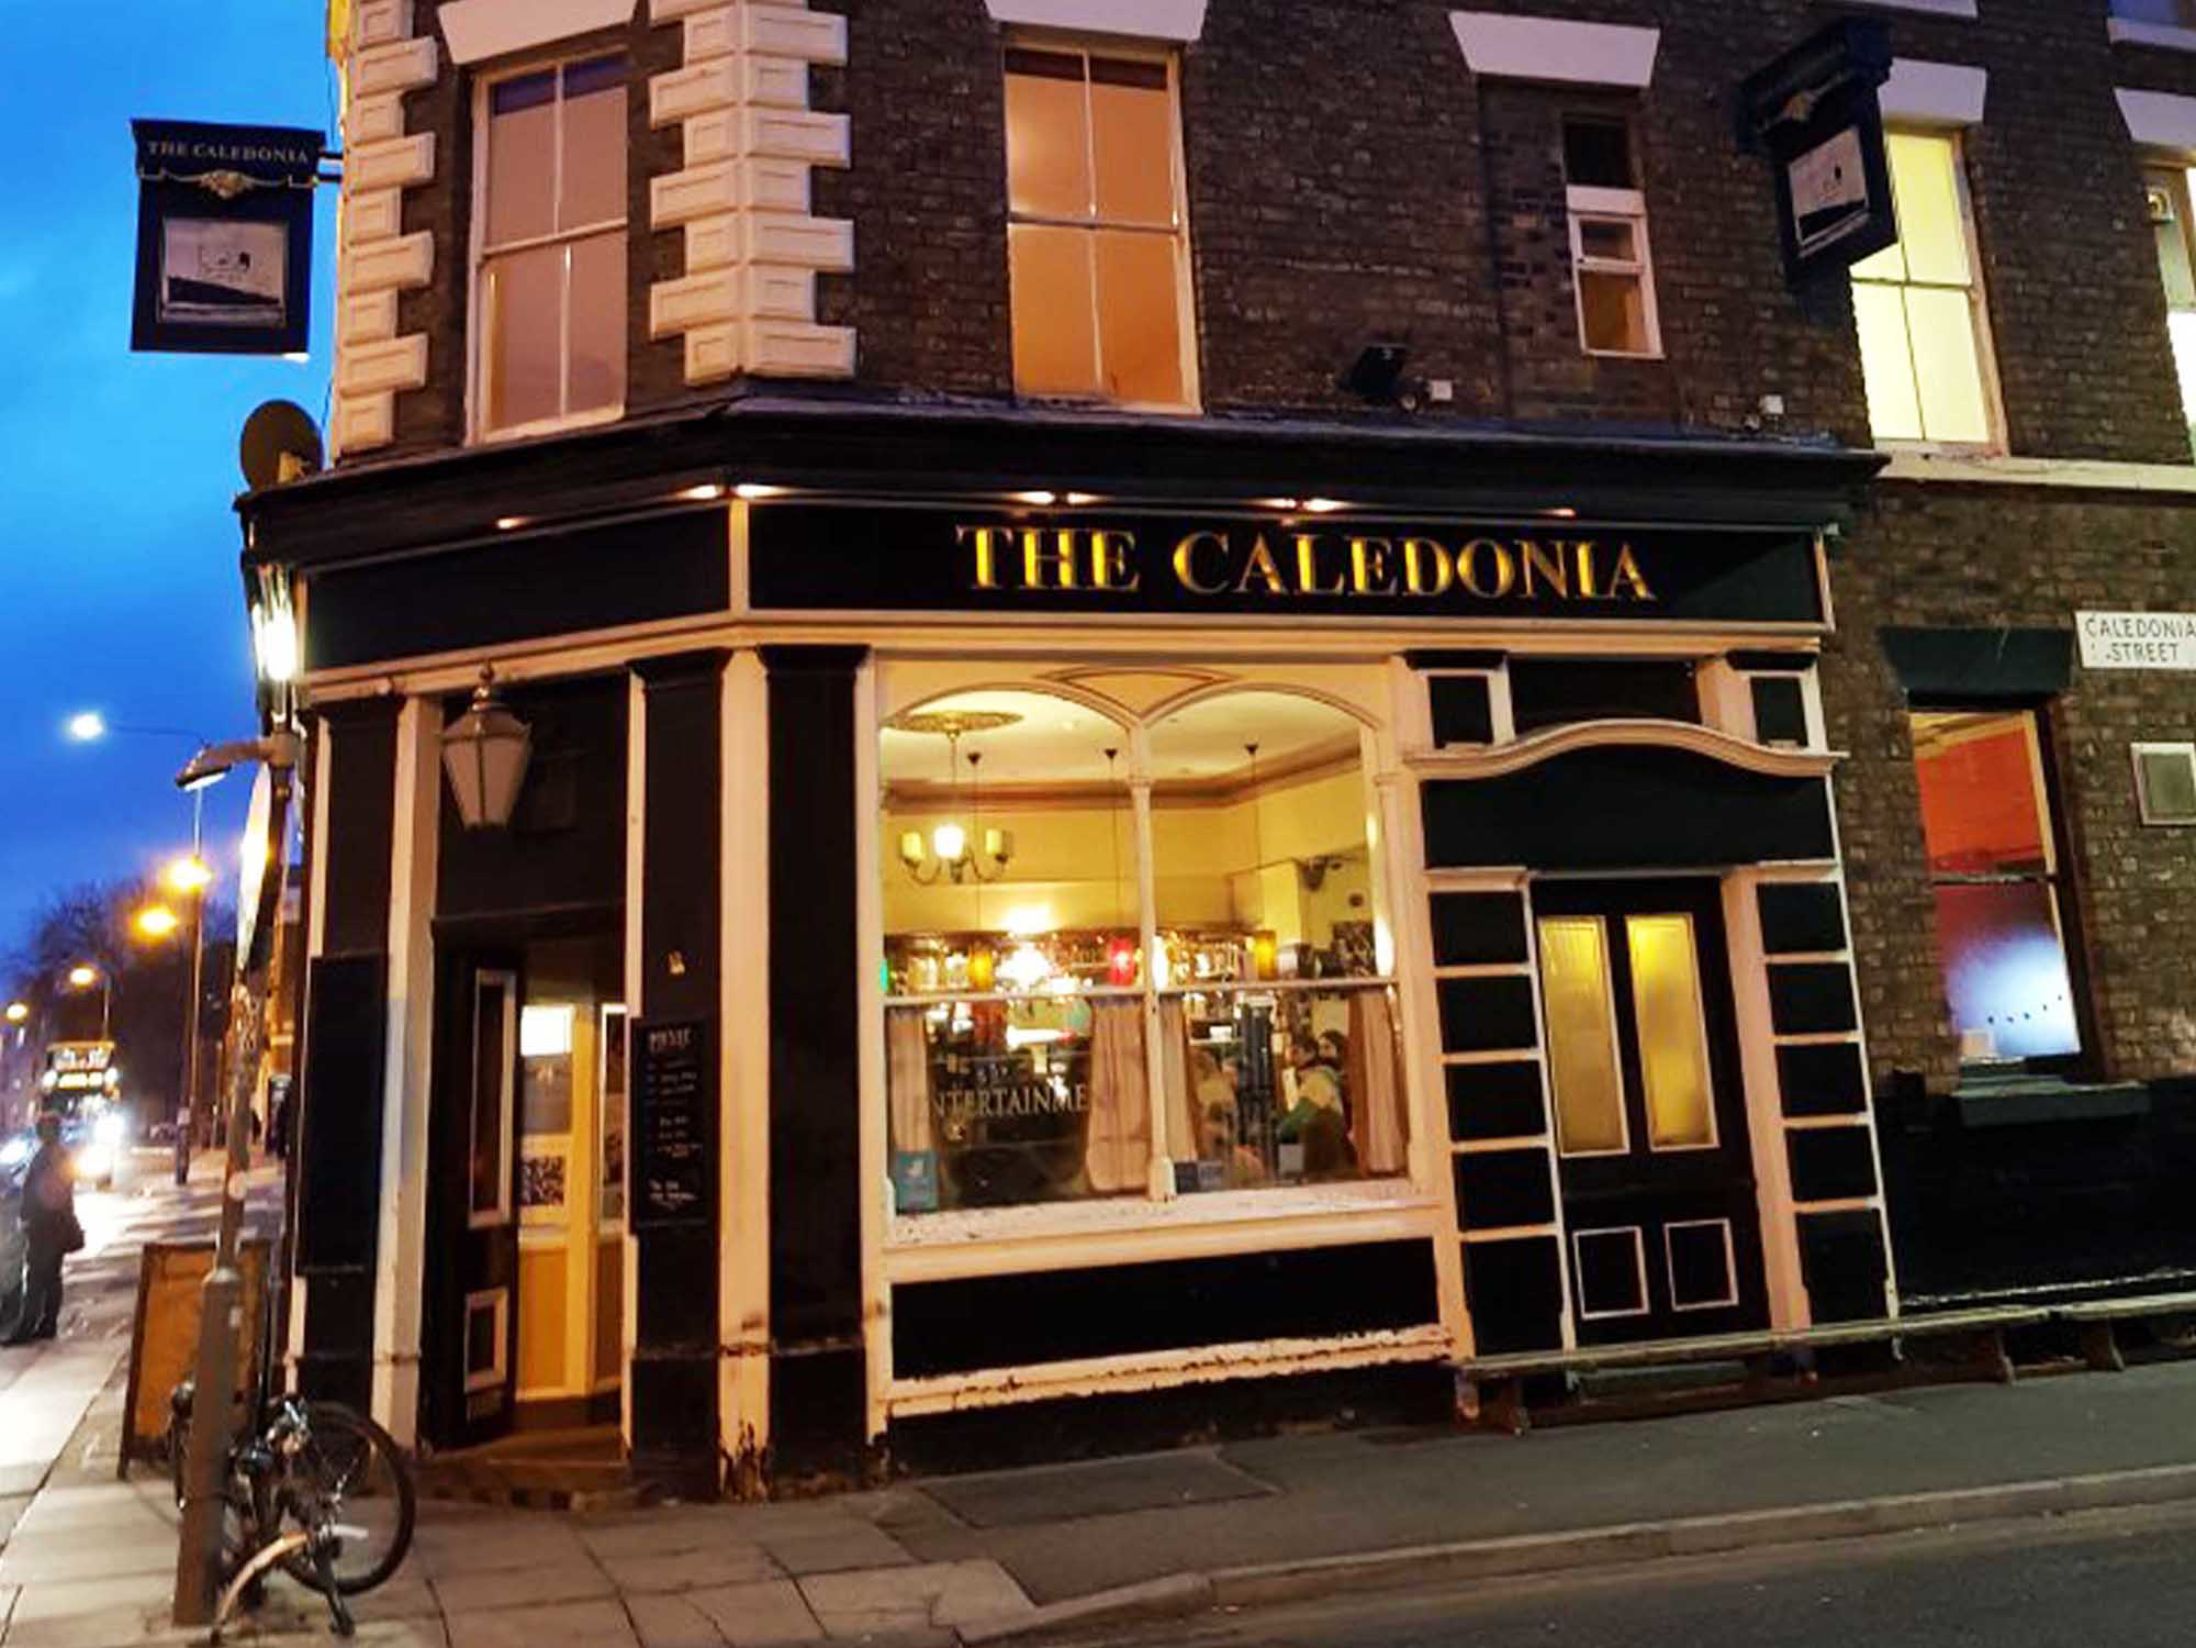 The 13 Best Pubs in Liverpool - The Caledonia